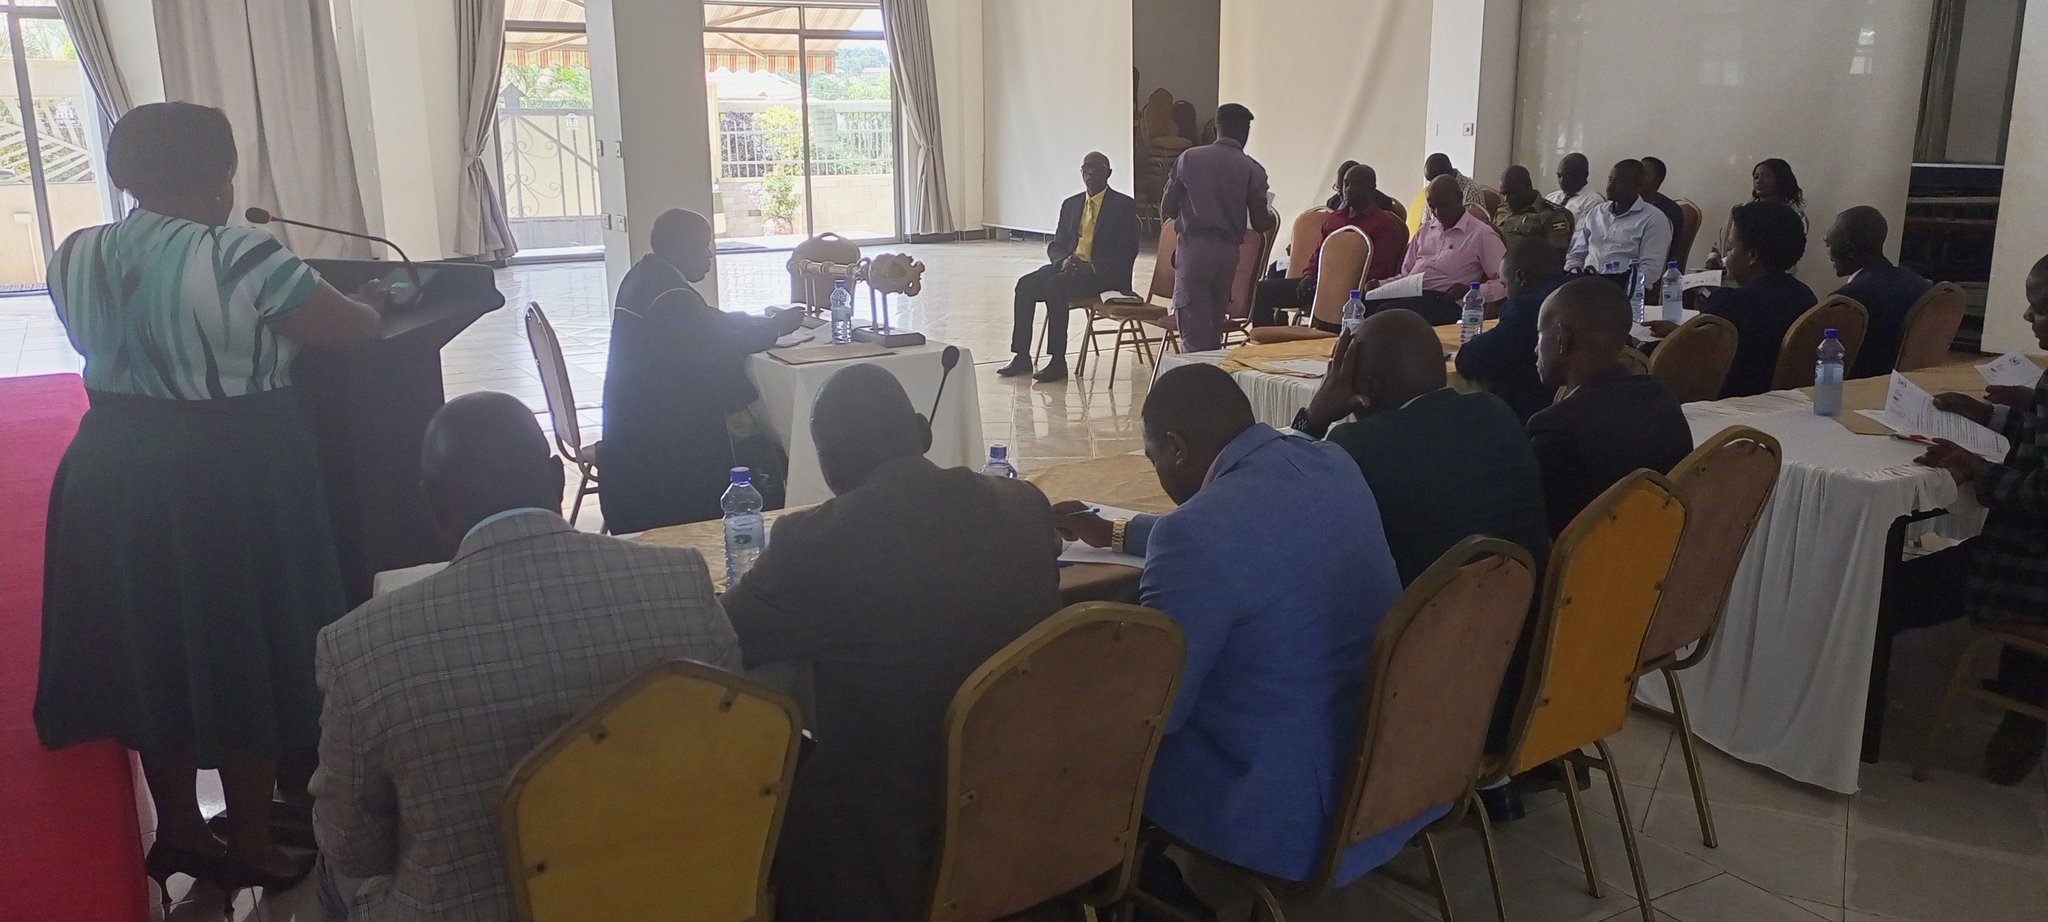 Hoima City, West Division Leaders to Identify Land to Accommodate Hoima West Division olice Post